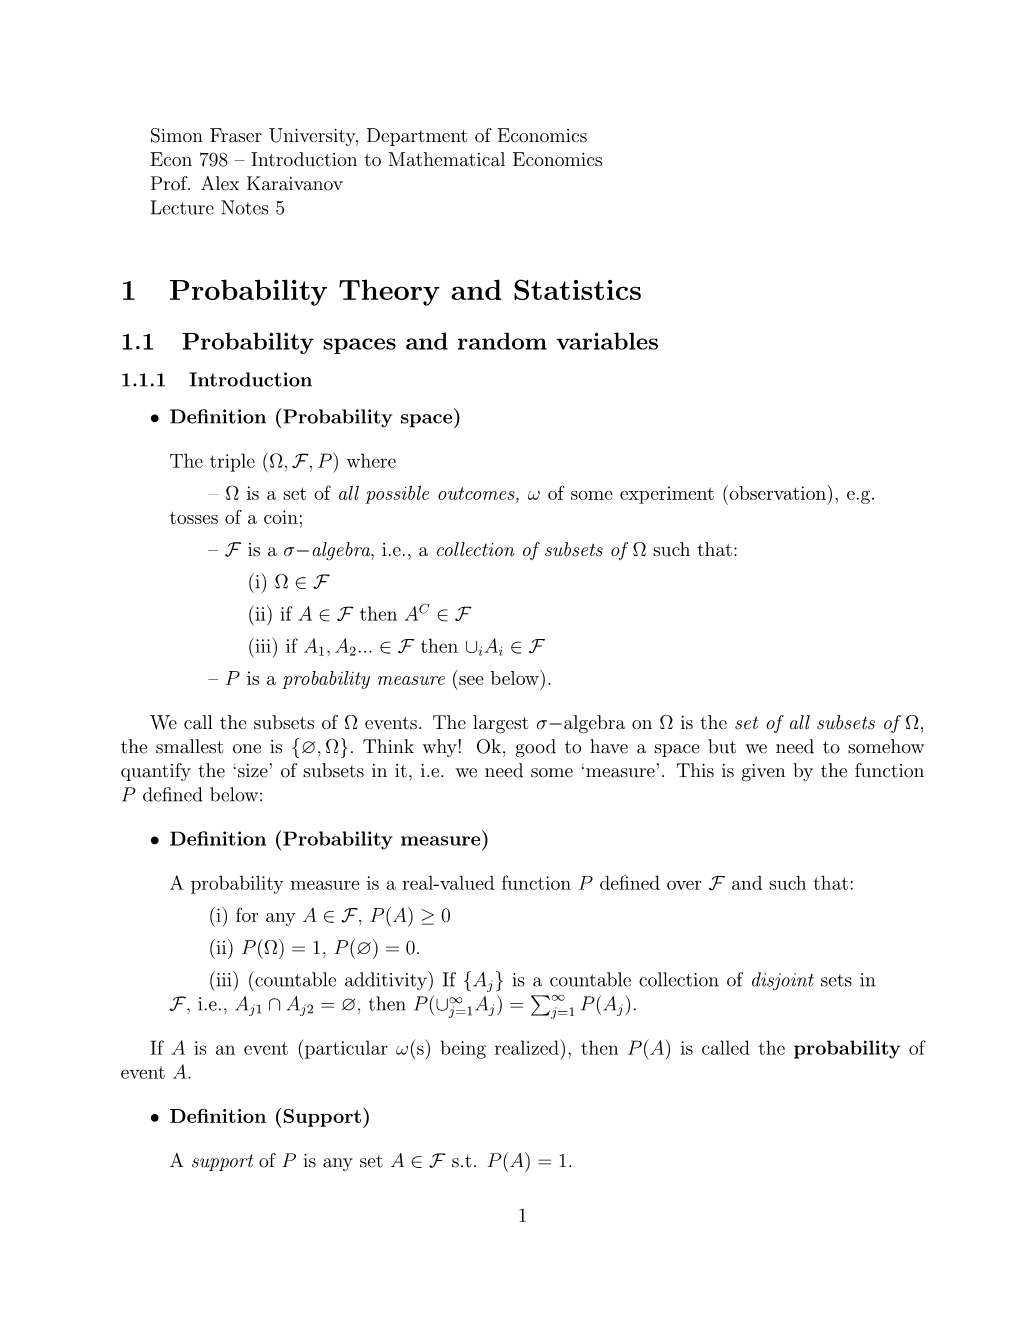 1 Probability Theory and Statistics